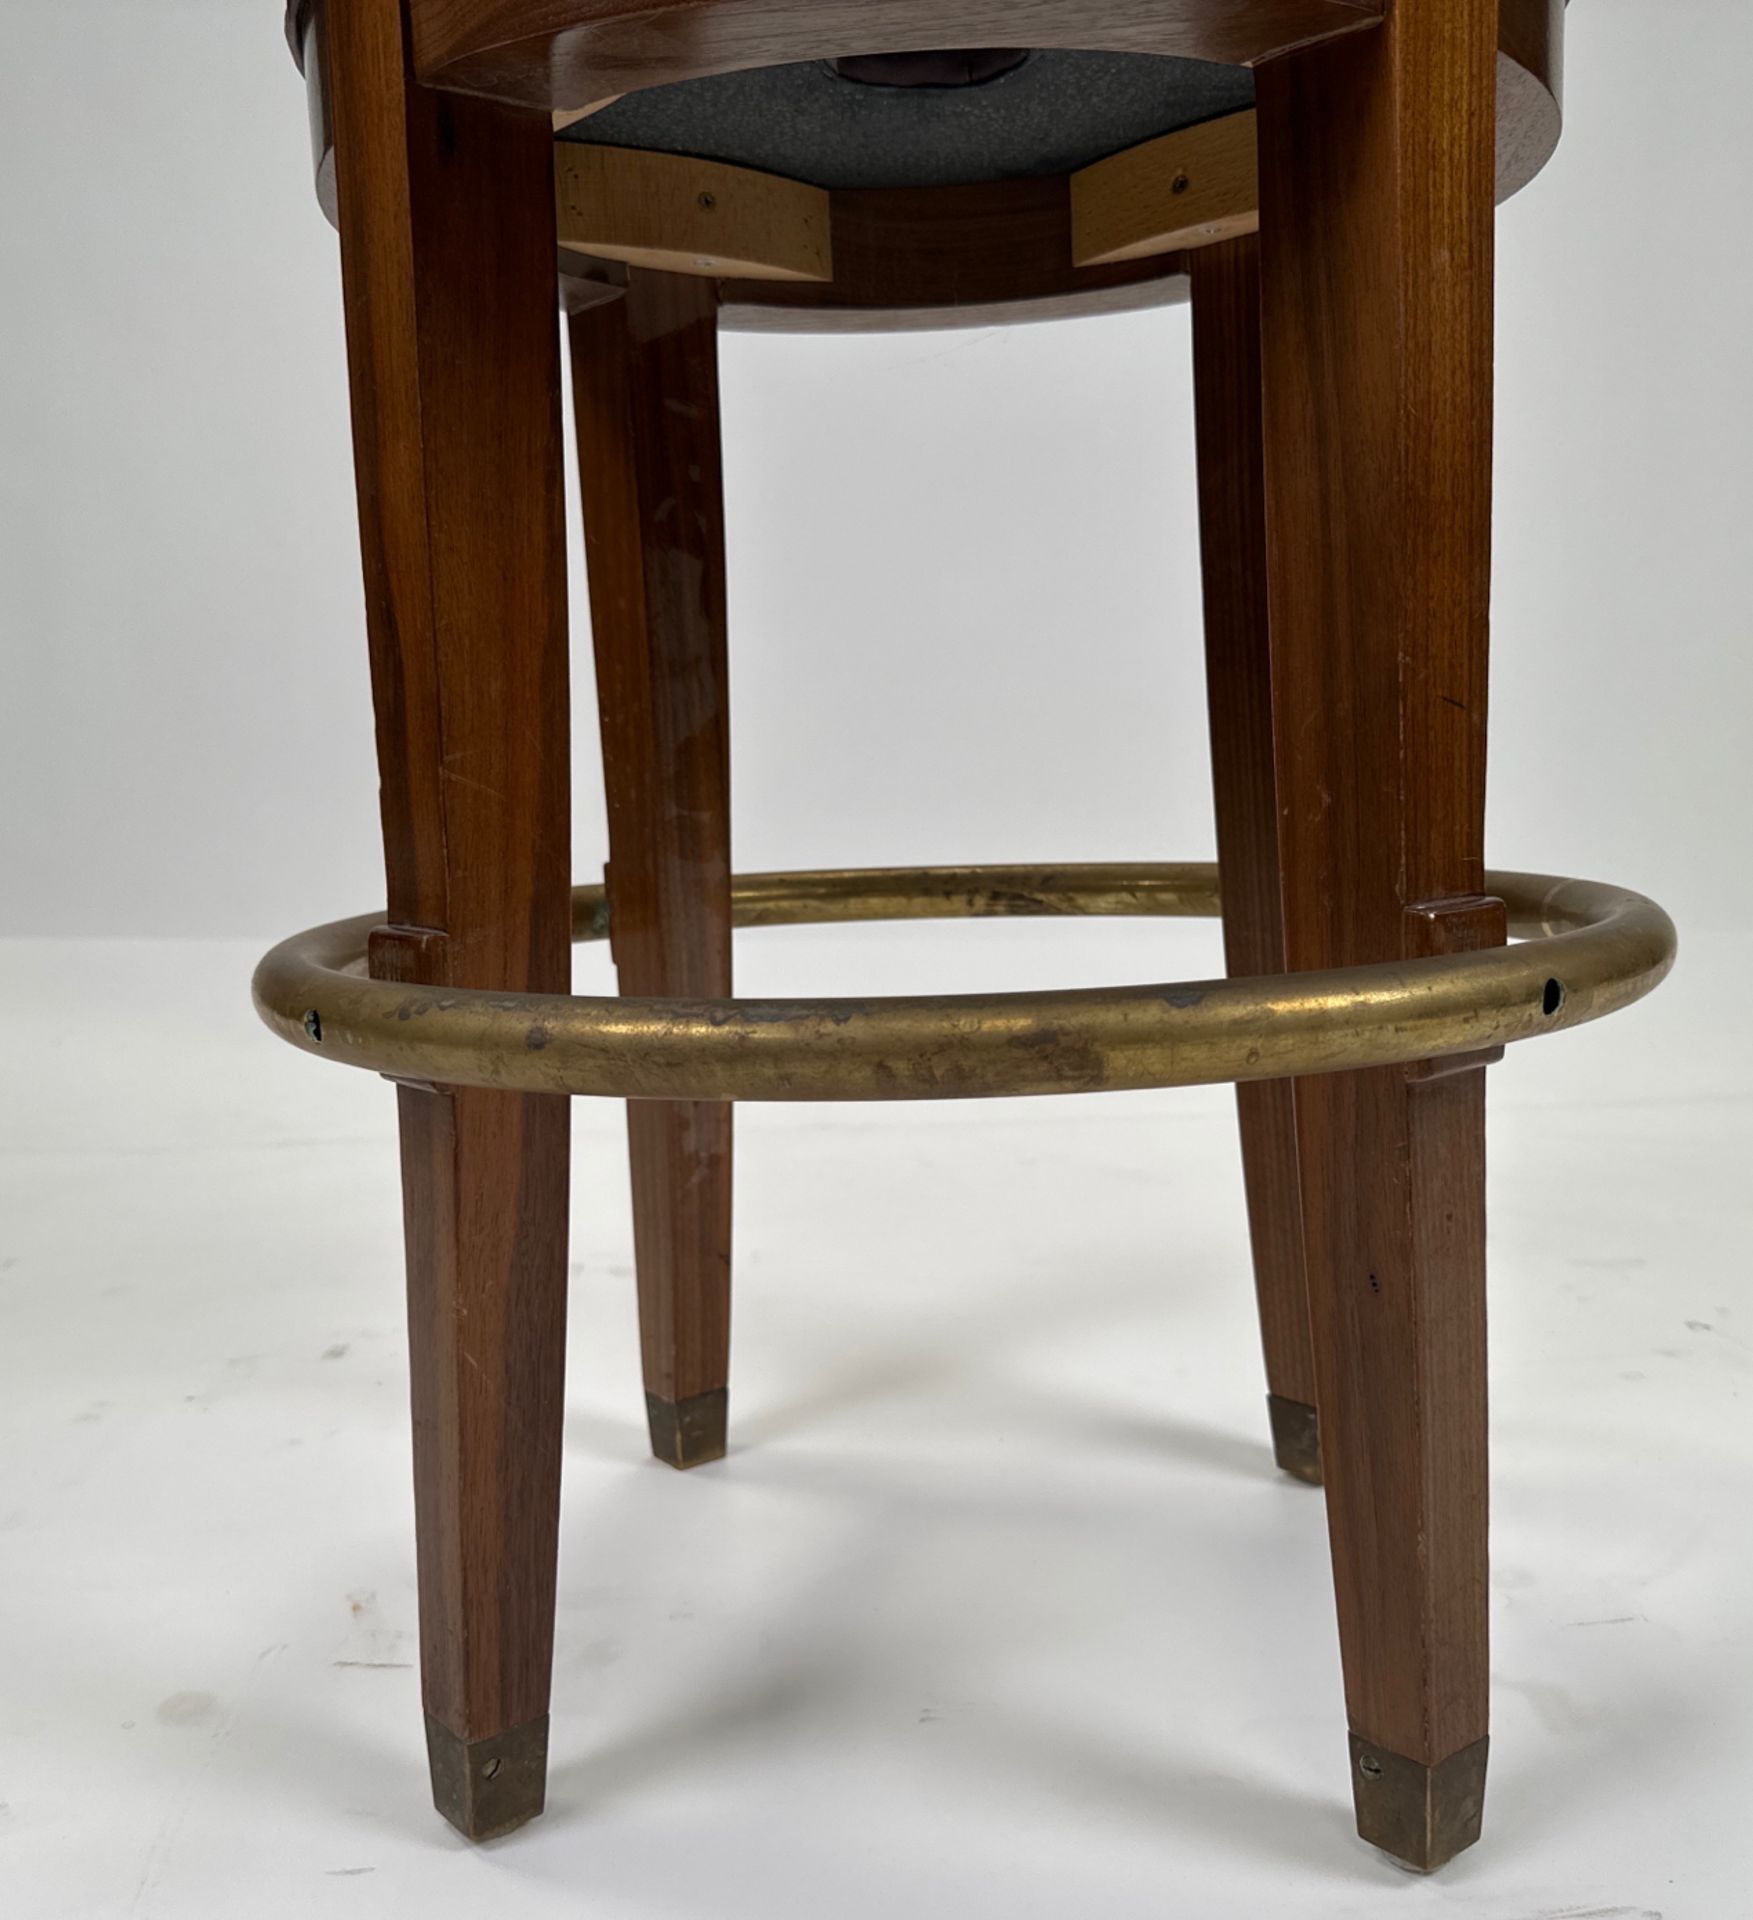 Leather & Brass Bar Stool - Image 6 of 6